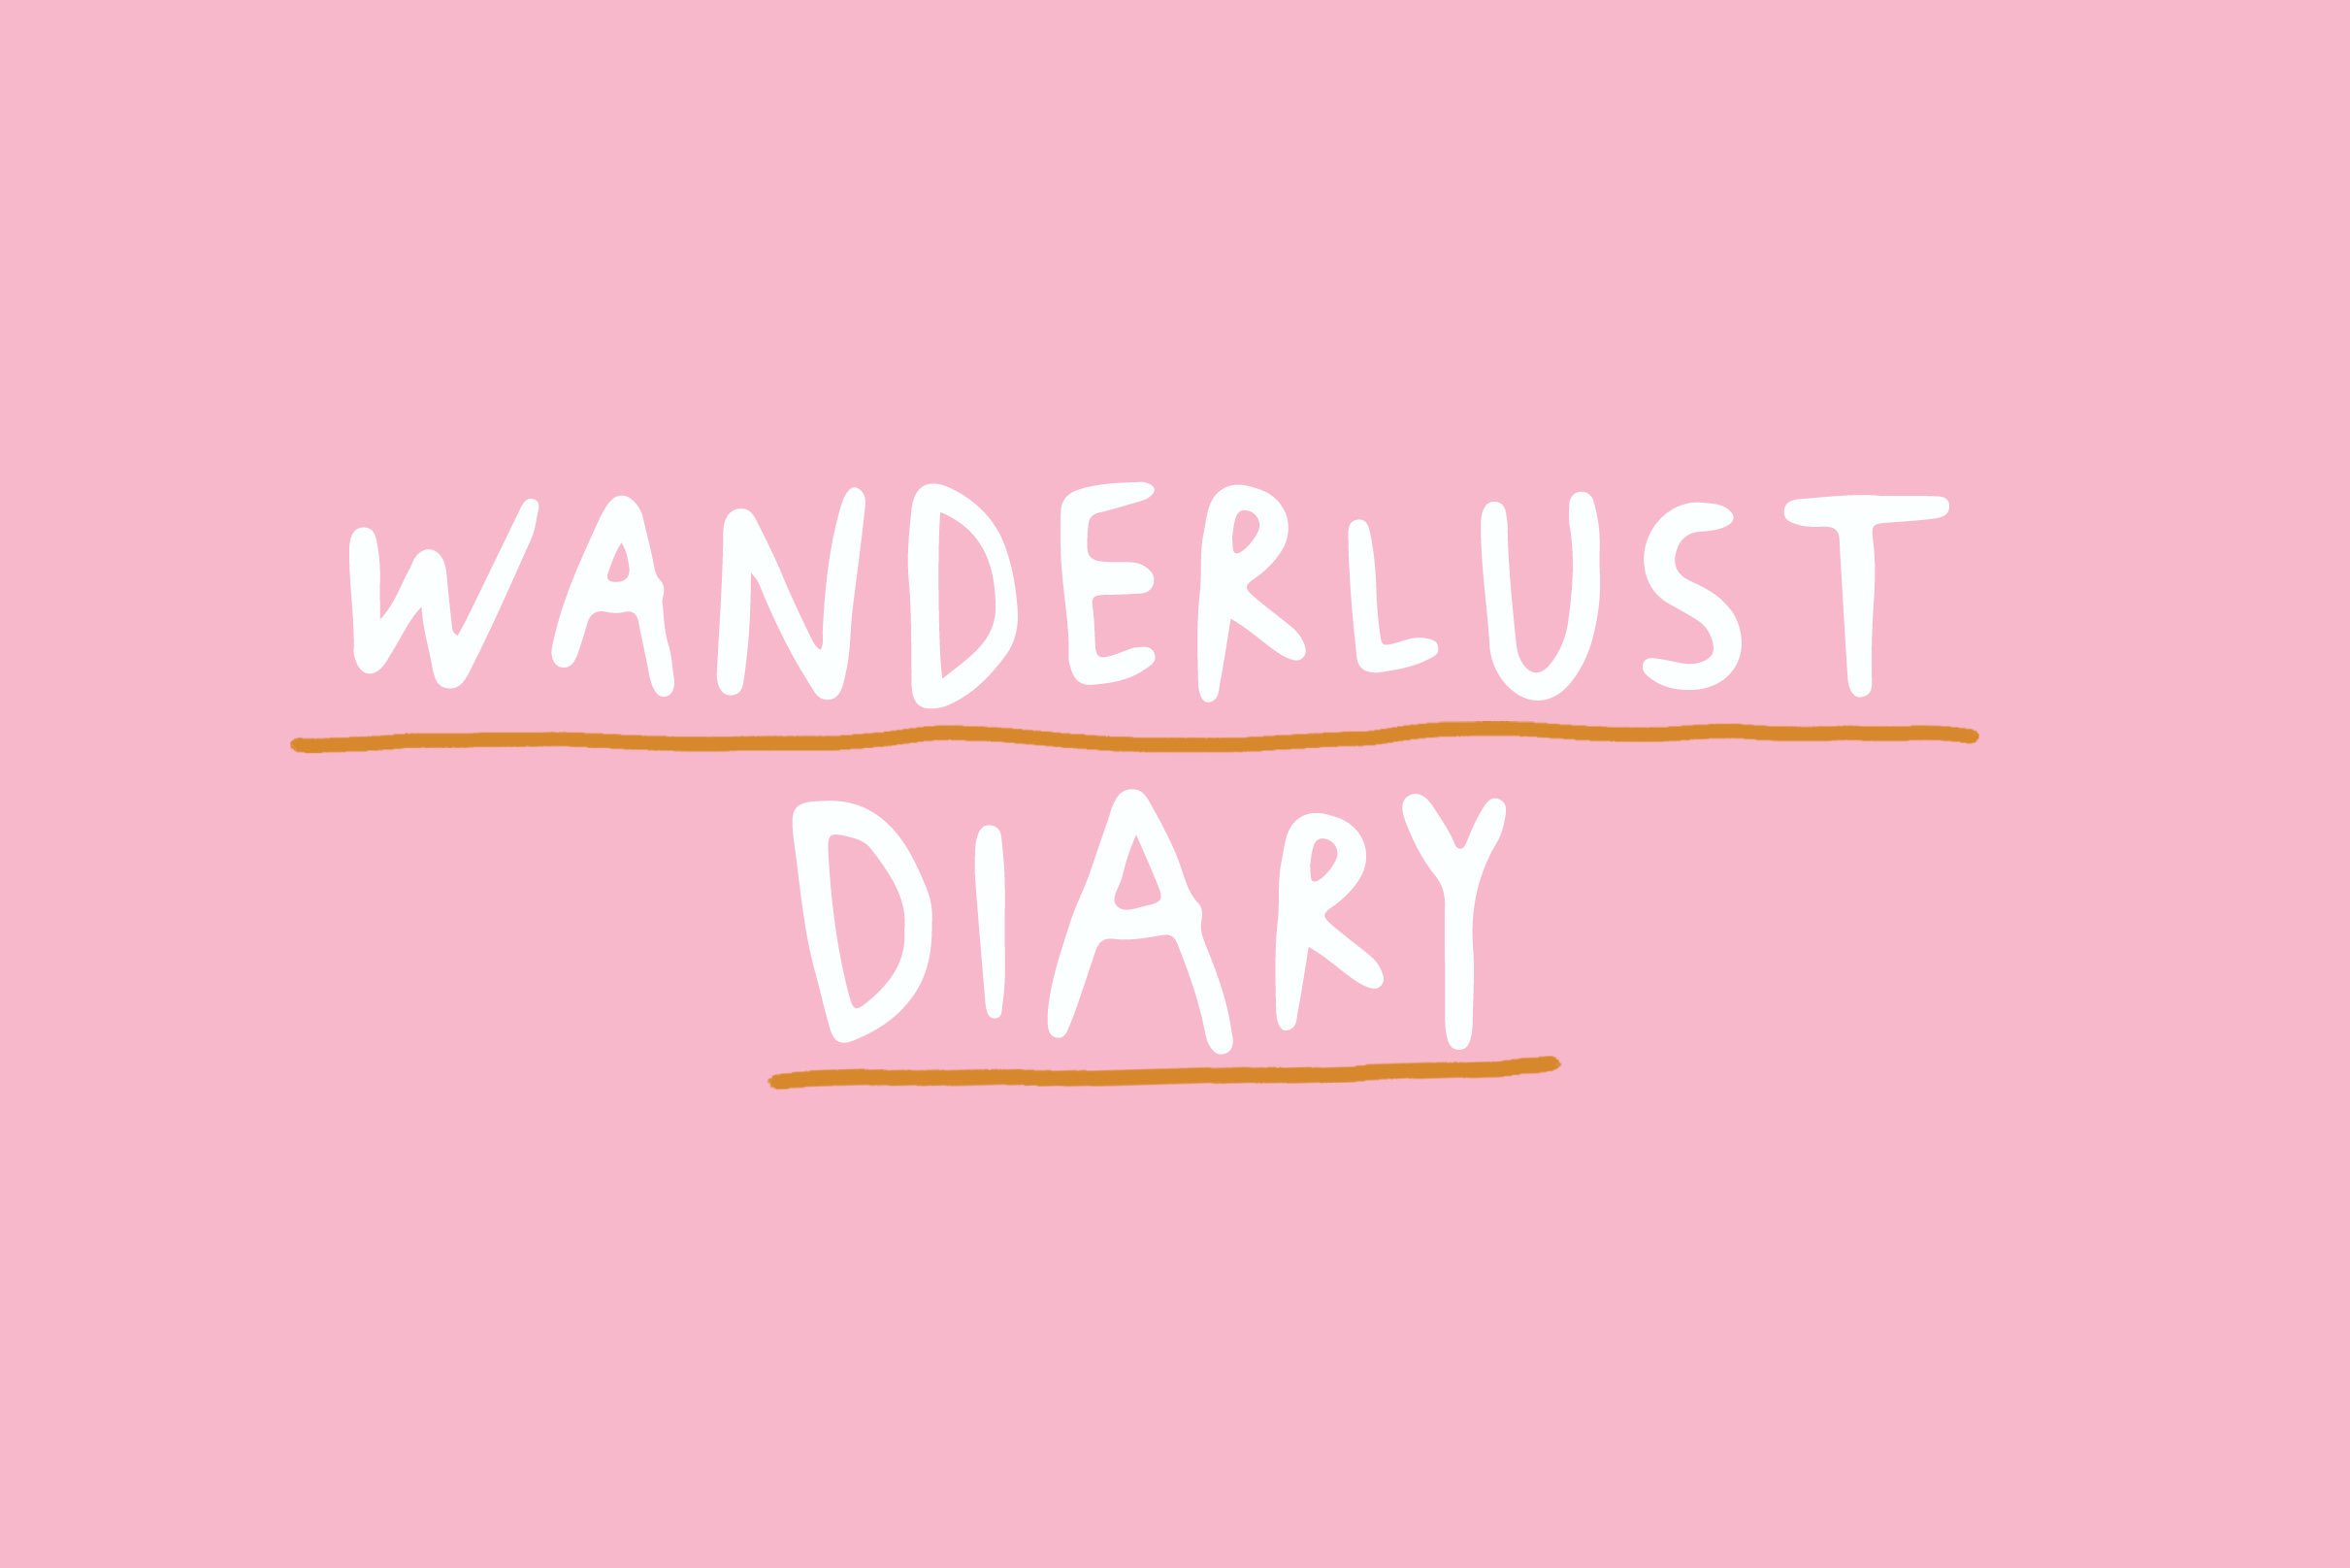 Wanderlust Diary cover image.